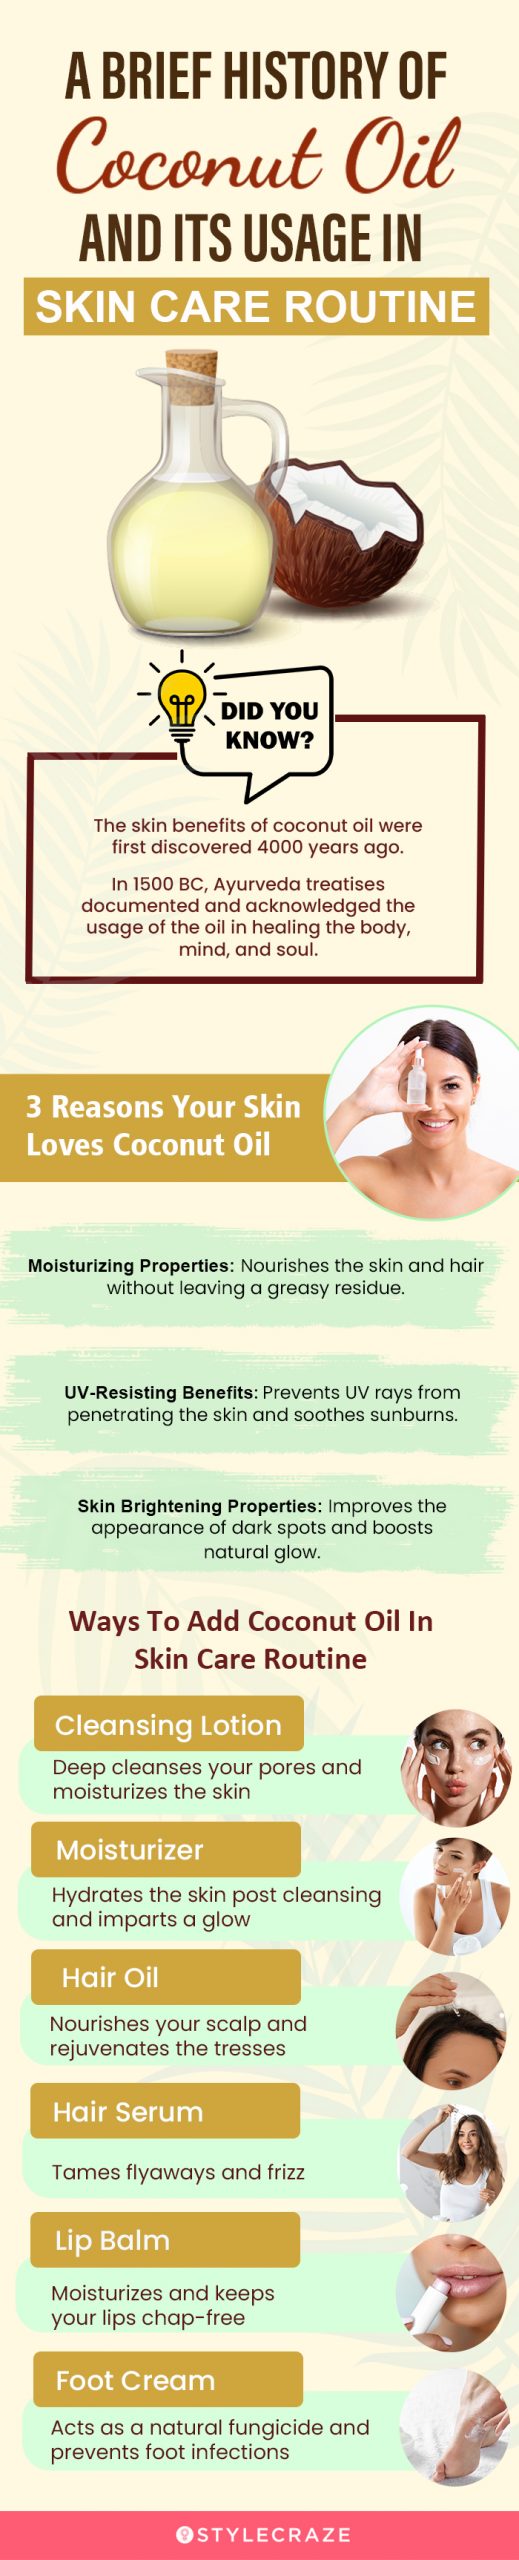 Reasons Your Skin Love Coconut Oil(infographic)